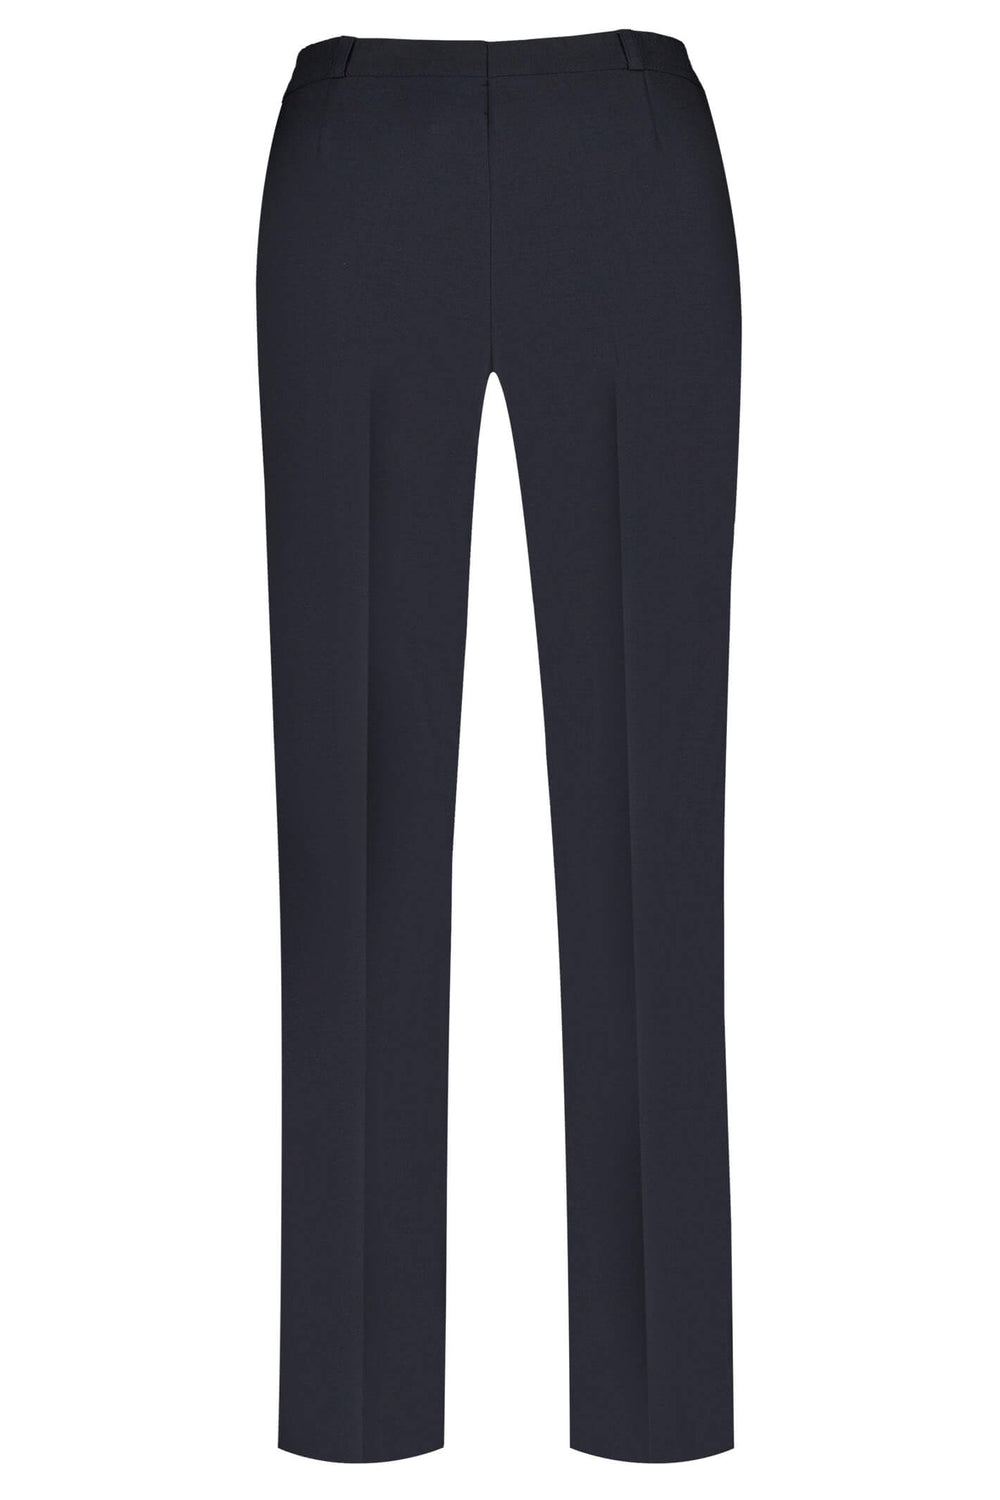 Zerres Anika 1303-983 69 Navy Wool Blend Stretch City Trousers - Shirley Allum Boutique